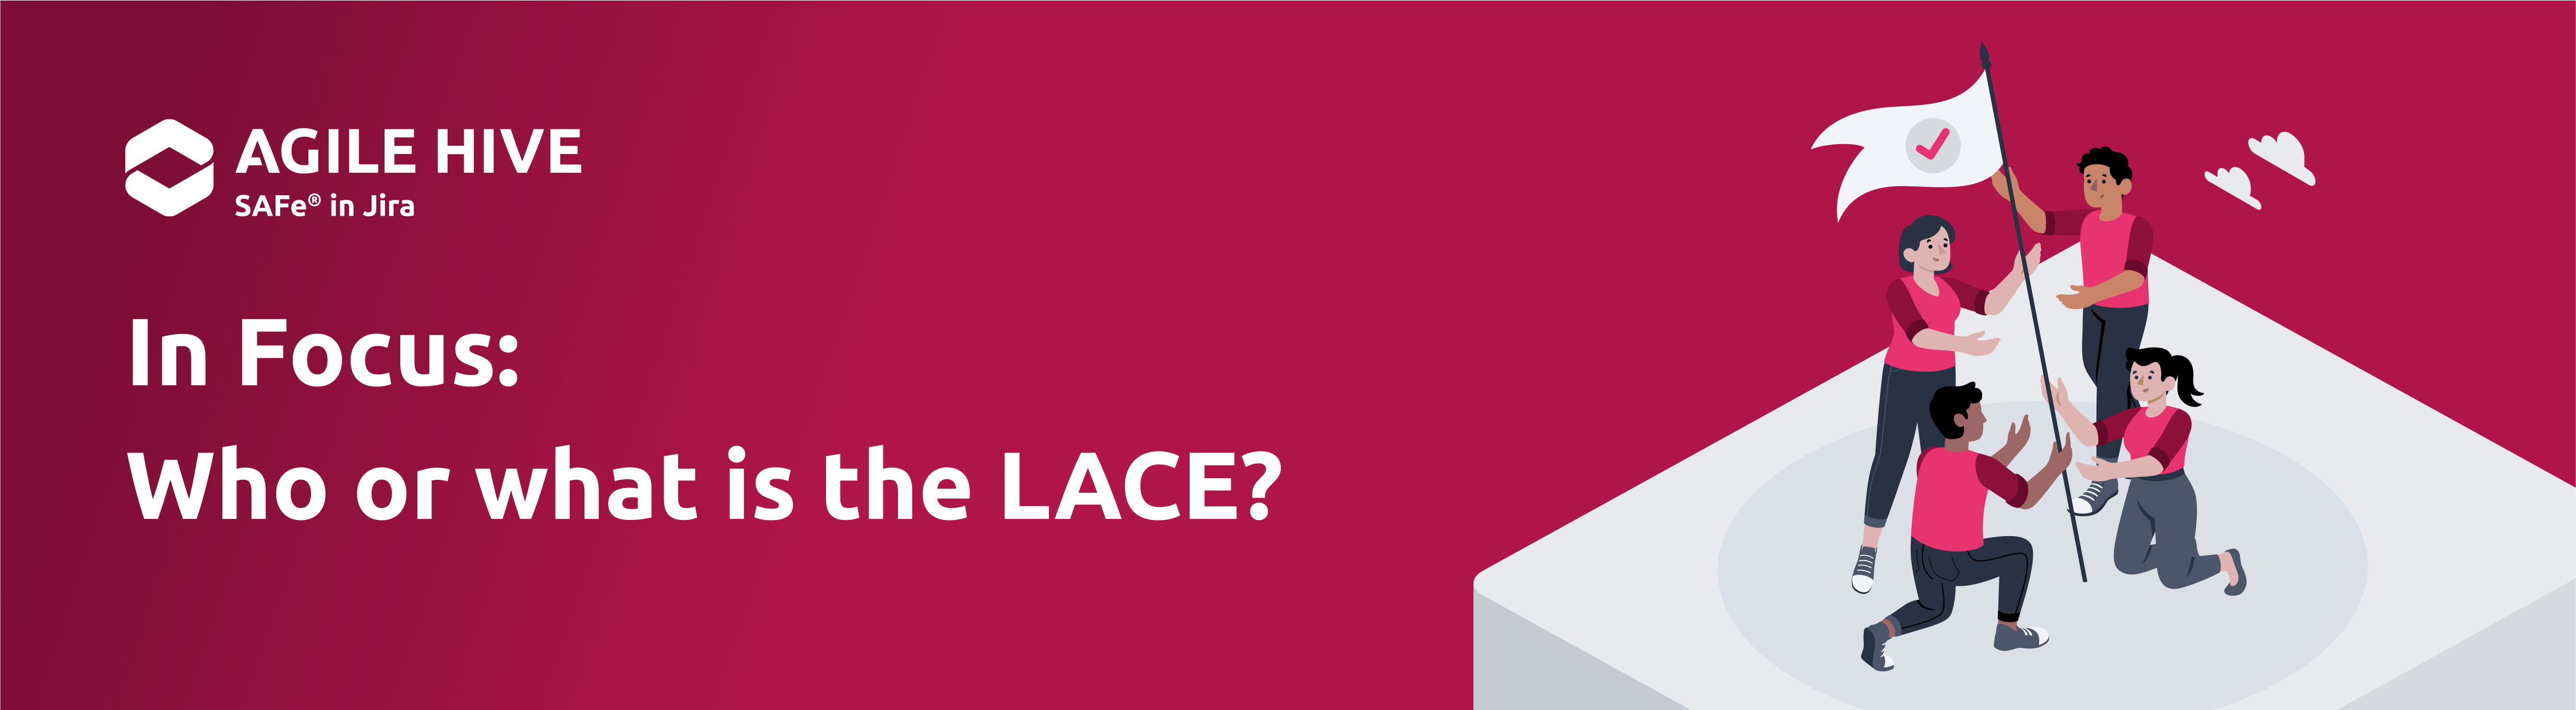 In Focus: Who or What is the LACE? - banner with title of article and agile hive logo